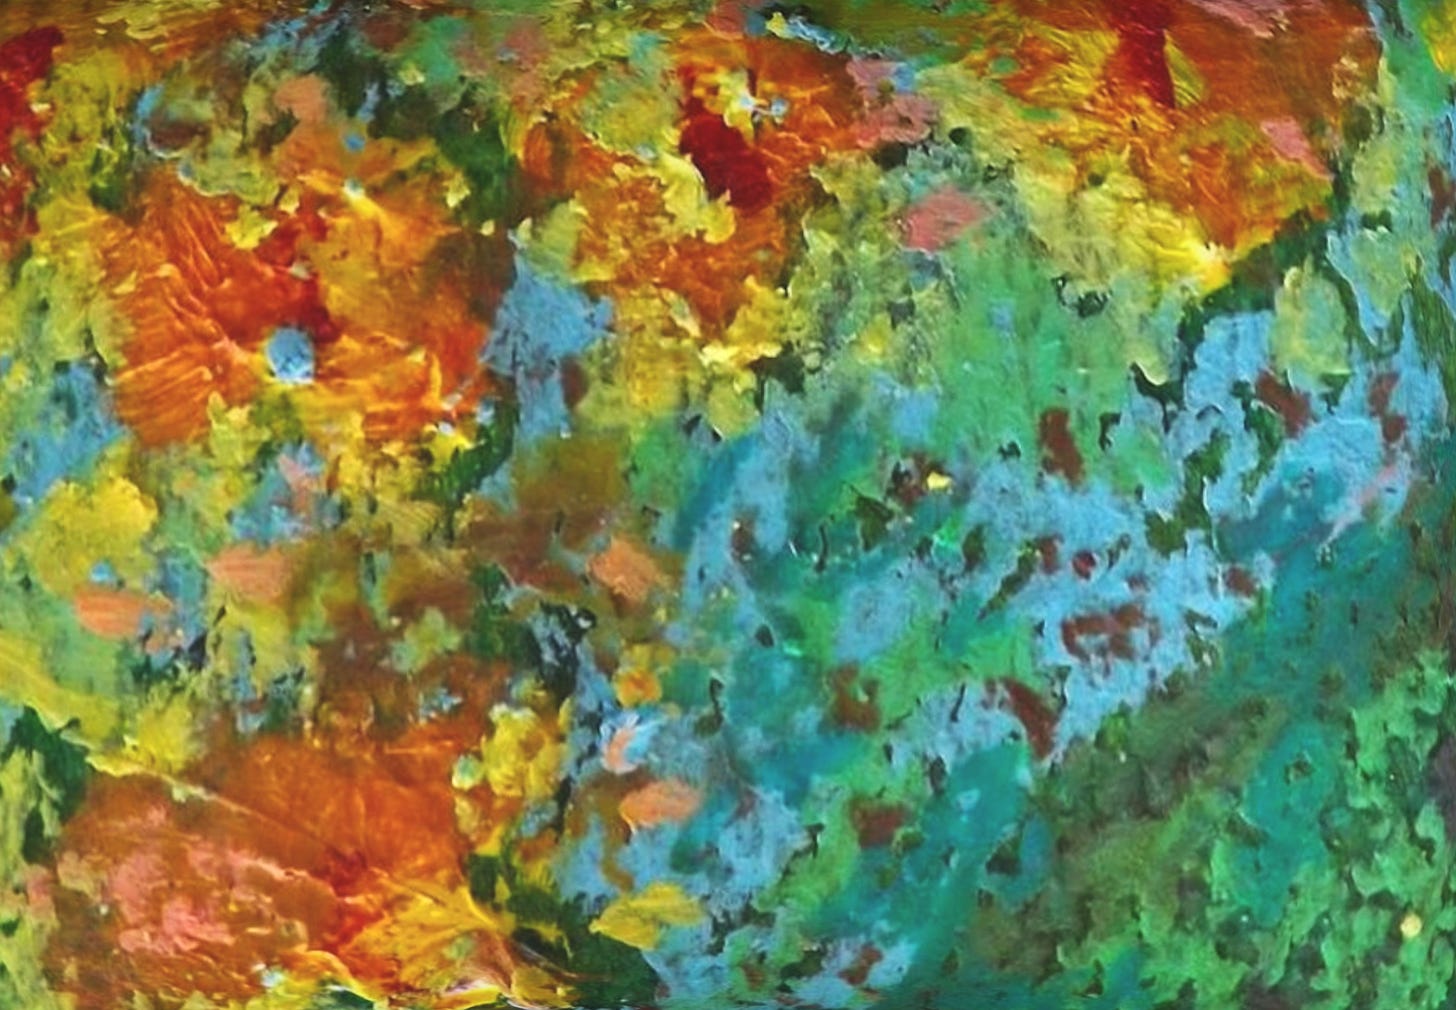 Photo of a detail of a mixed media painting by Sherry Killam Arts suggesting orange and yellow flowers floating in a blue green lagoon.